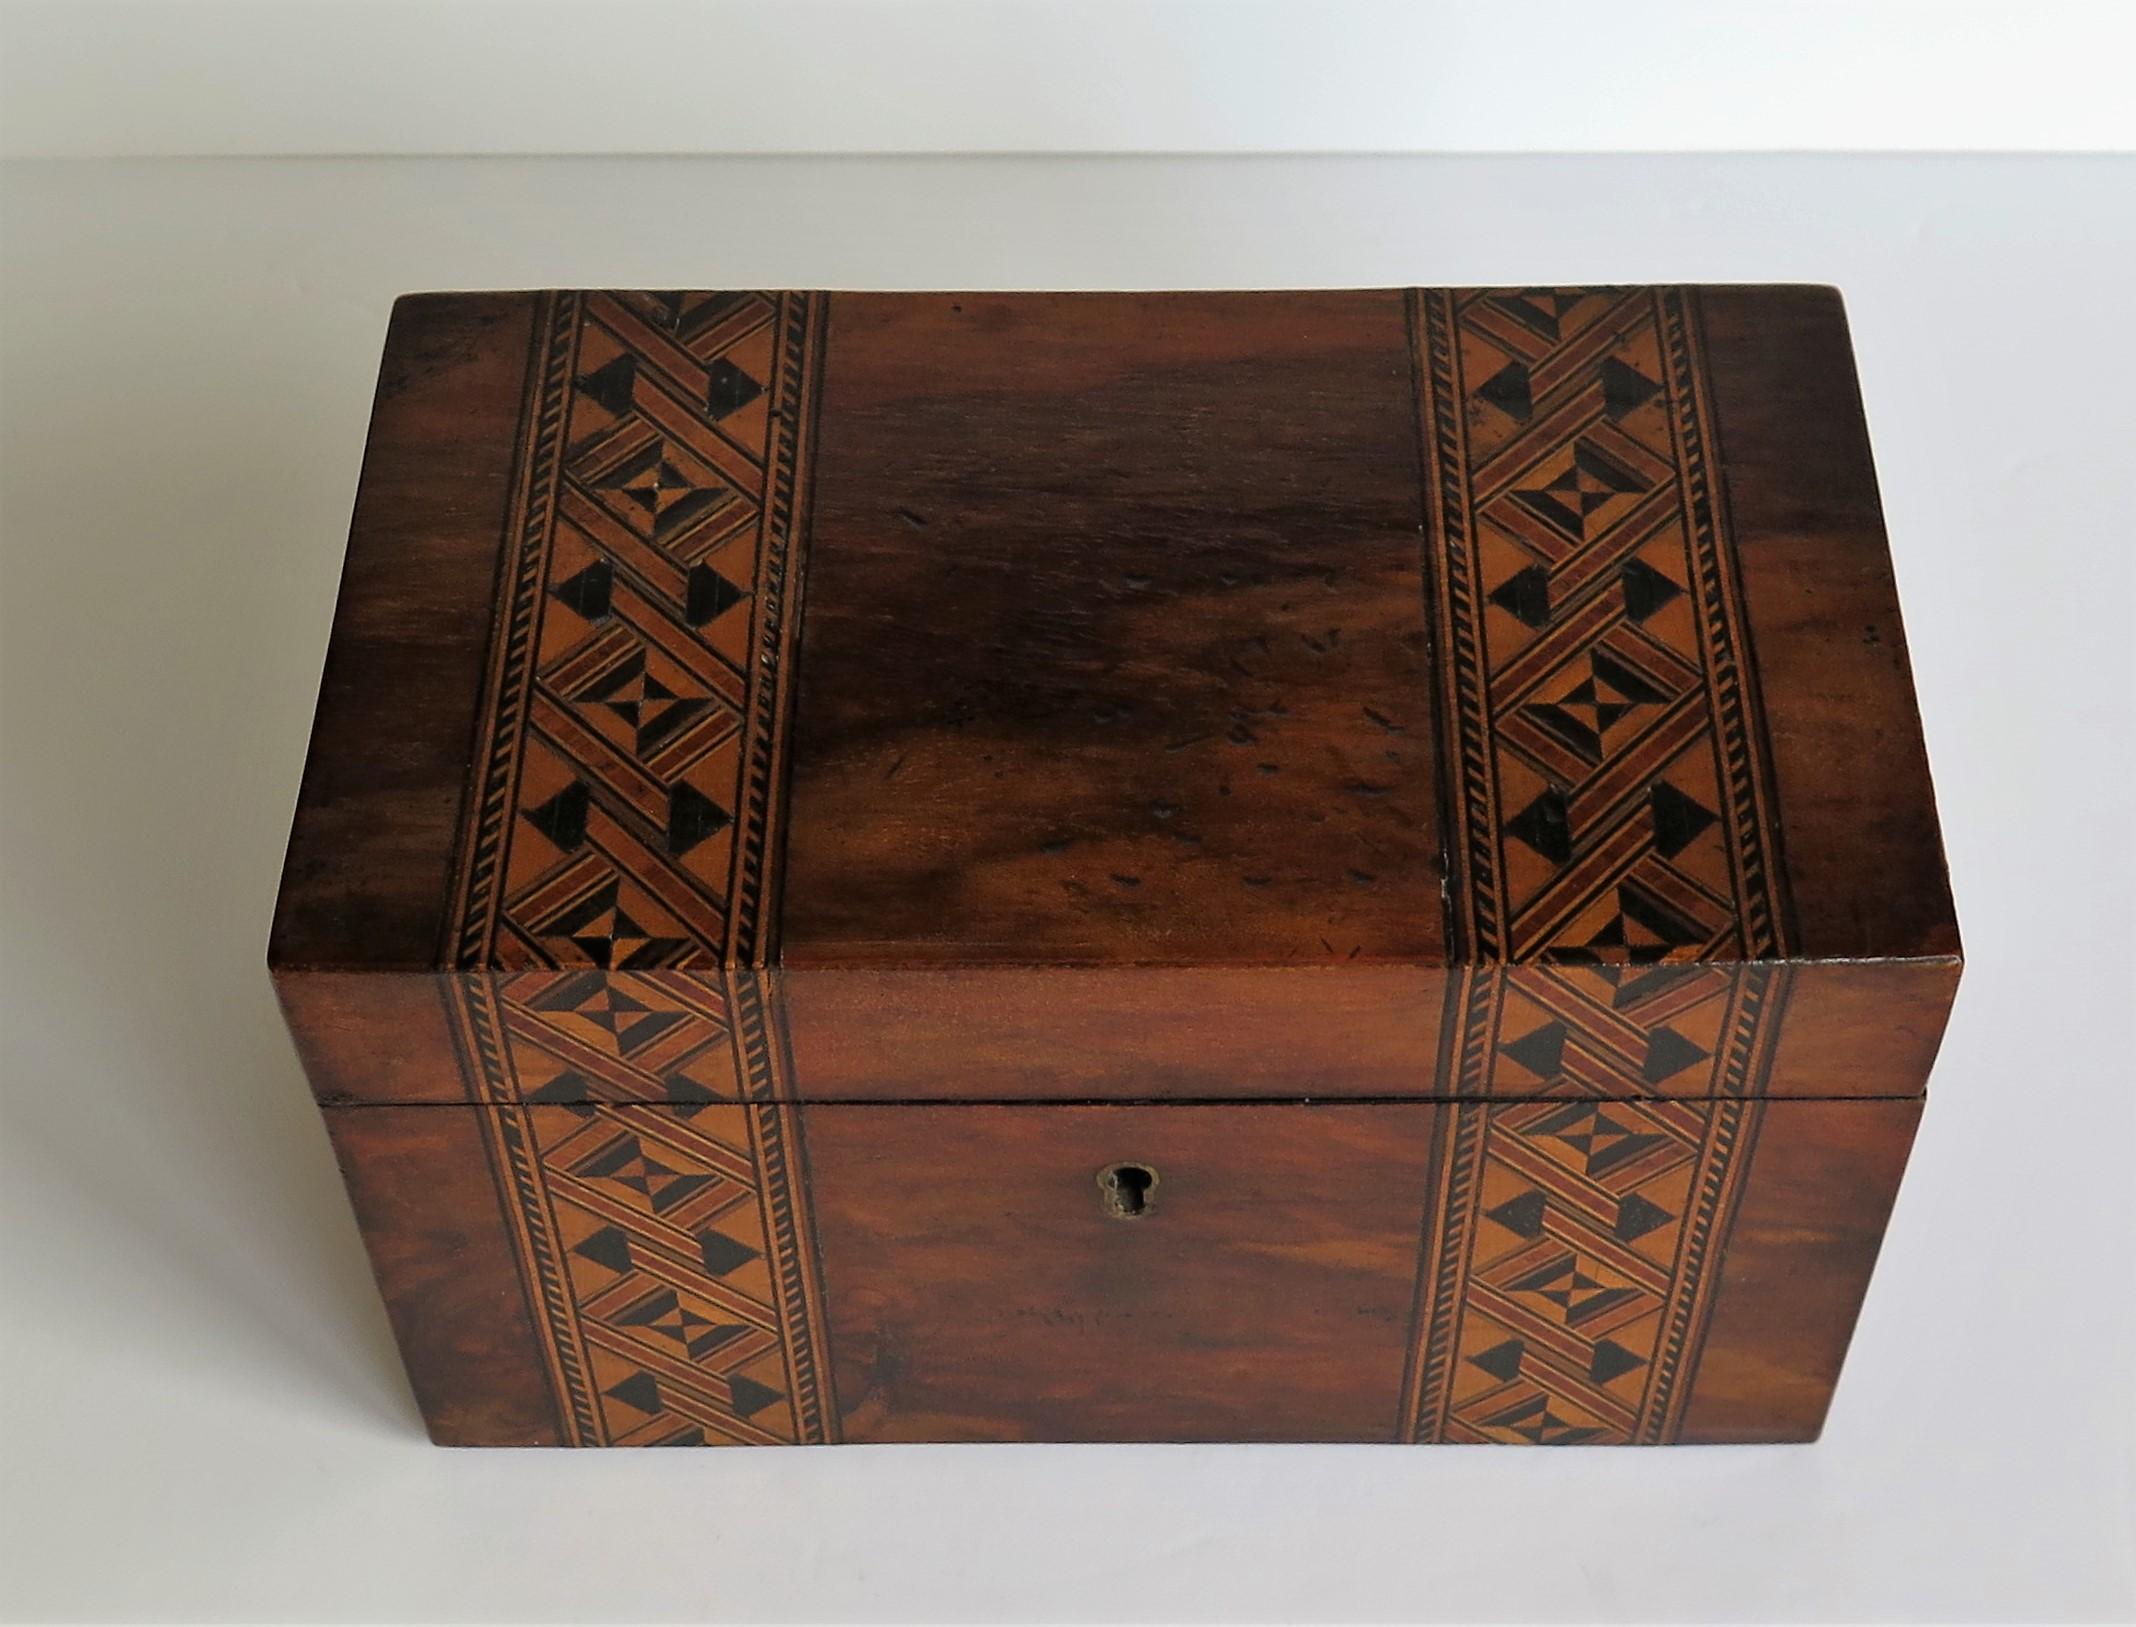 Hand-Crafted Mid-19th Century Lidded Box Walnut with Parquetry Mosaic Inlay, Mid Victorian